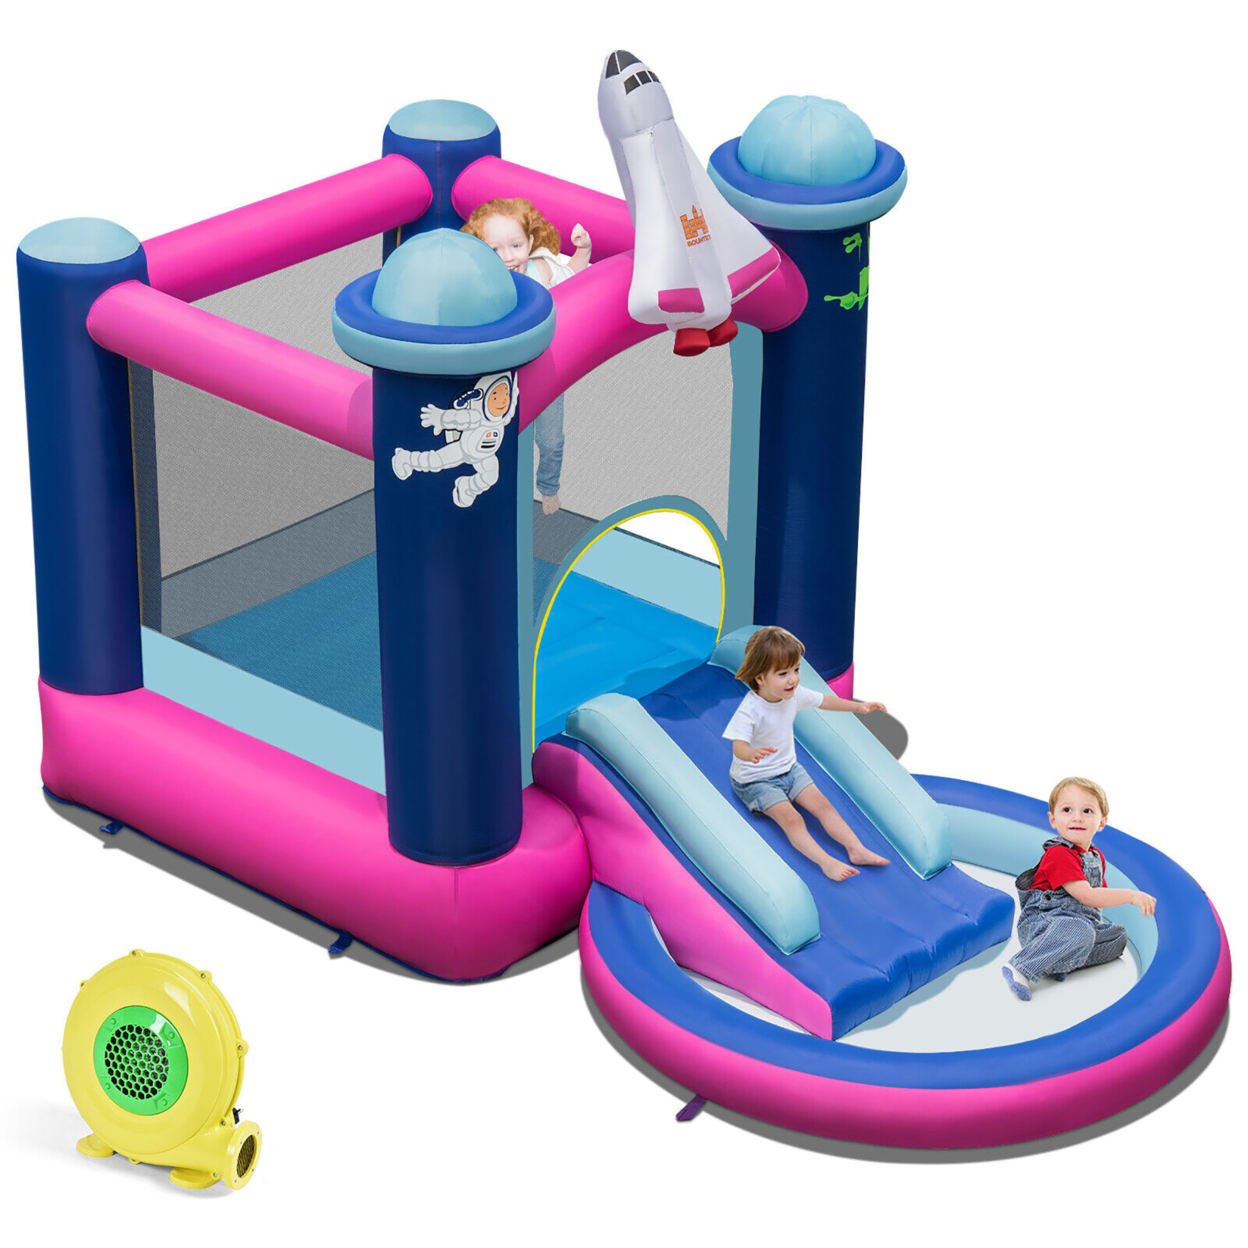 Inflatable Space-themed Bounce House Kids 3-in-1 Bounce Castle W/ 480W Blower